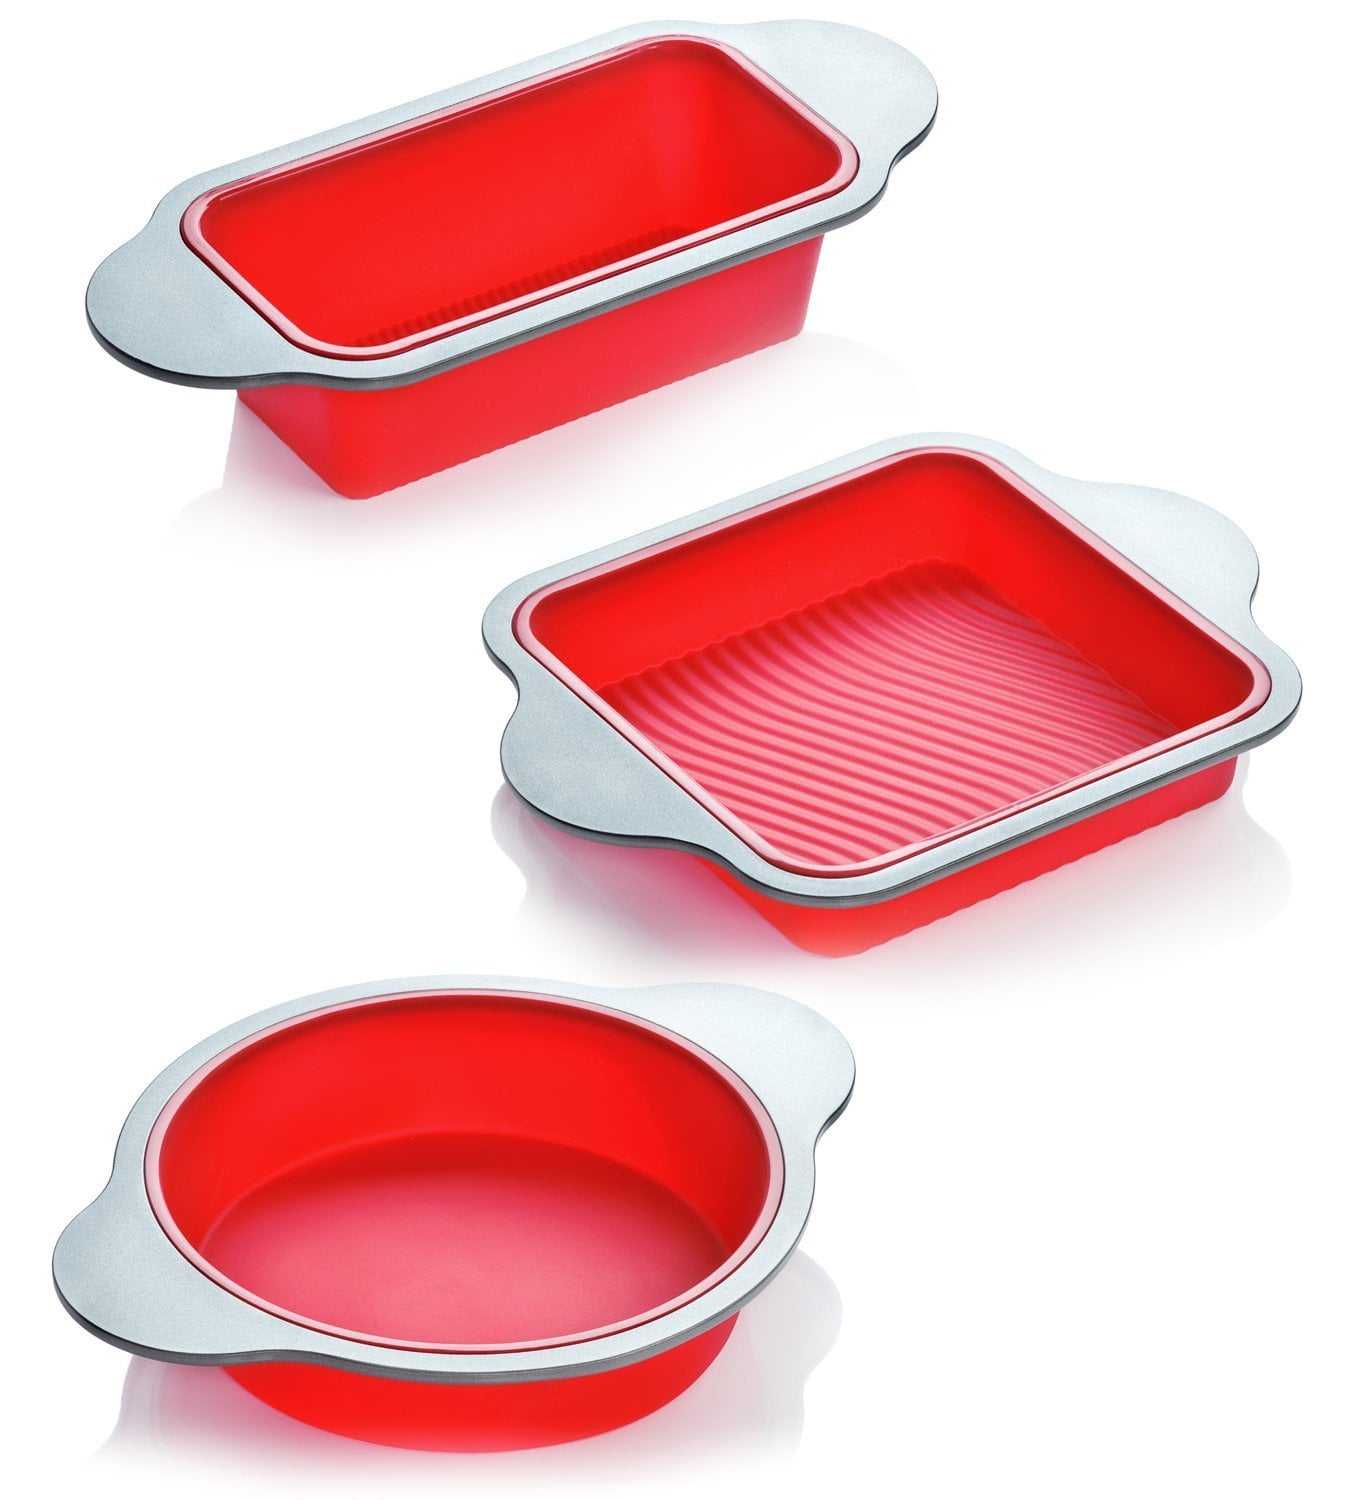 Baking Pan Silicone Square Non-stick Cake Jelly Molds for Bakeware DIY Tools 